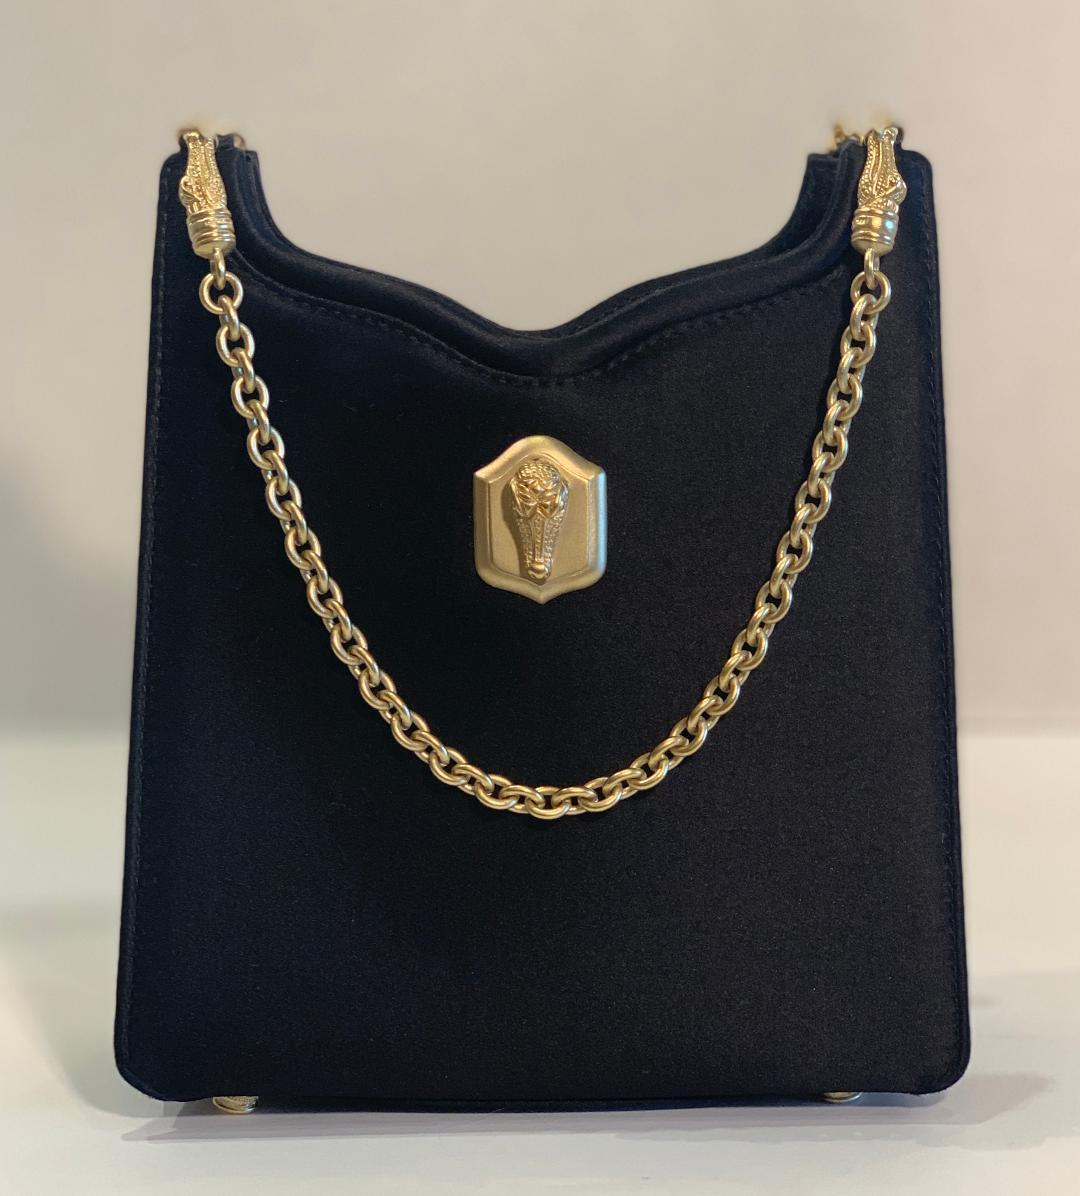 Very elegant designer Barry Kieselstein-Cord, black satin evening purse with the iconic gold tone Florentine finish metal alligator accents. This black satin evening bag has a gold alligator head on the front and four matte gold alligator heads